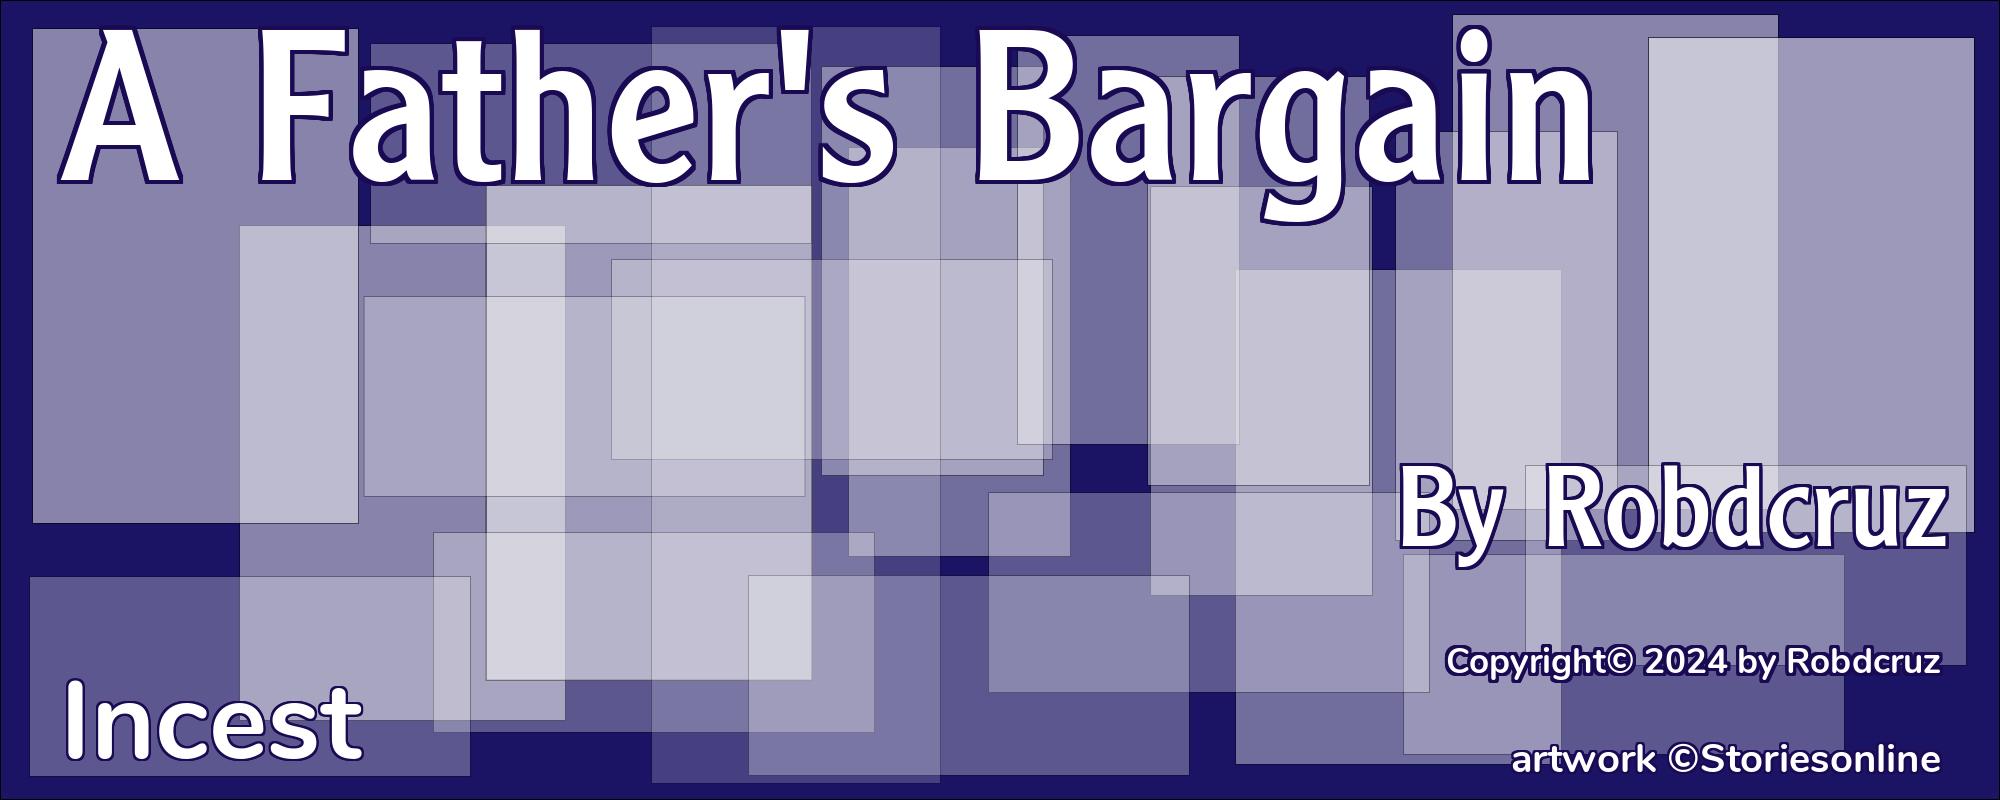 A Father's Bargain - Cover